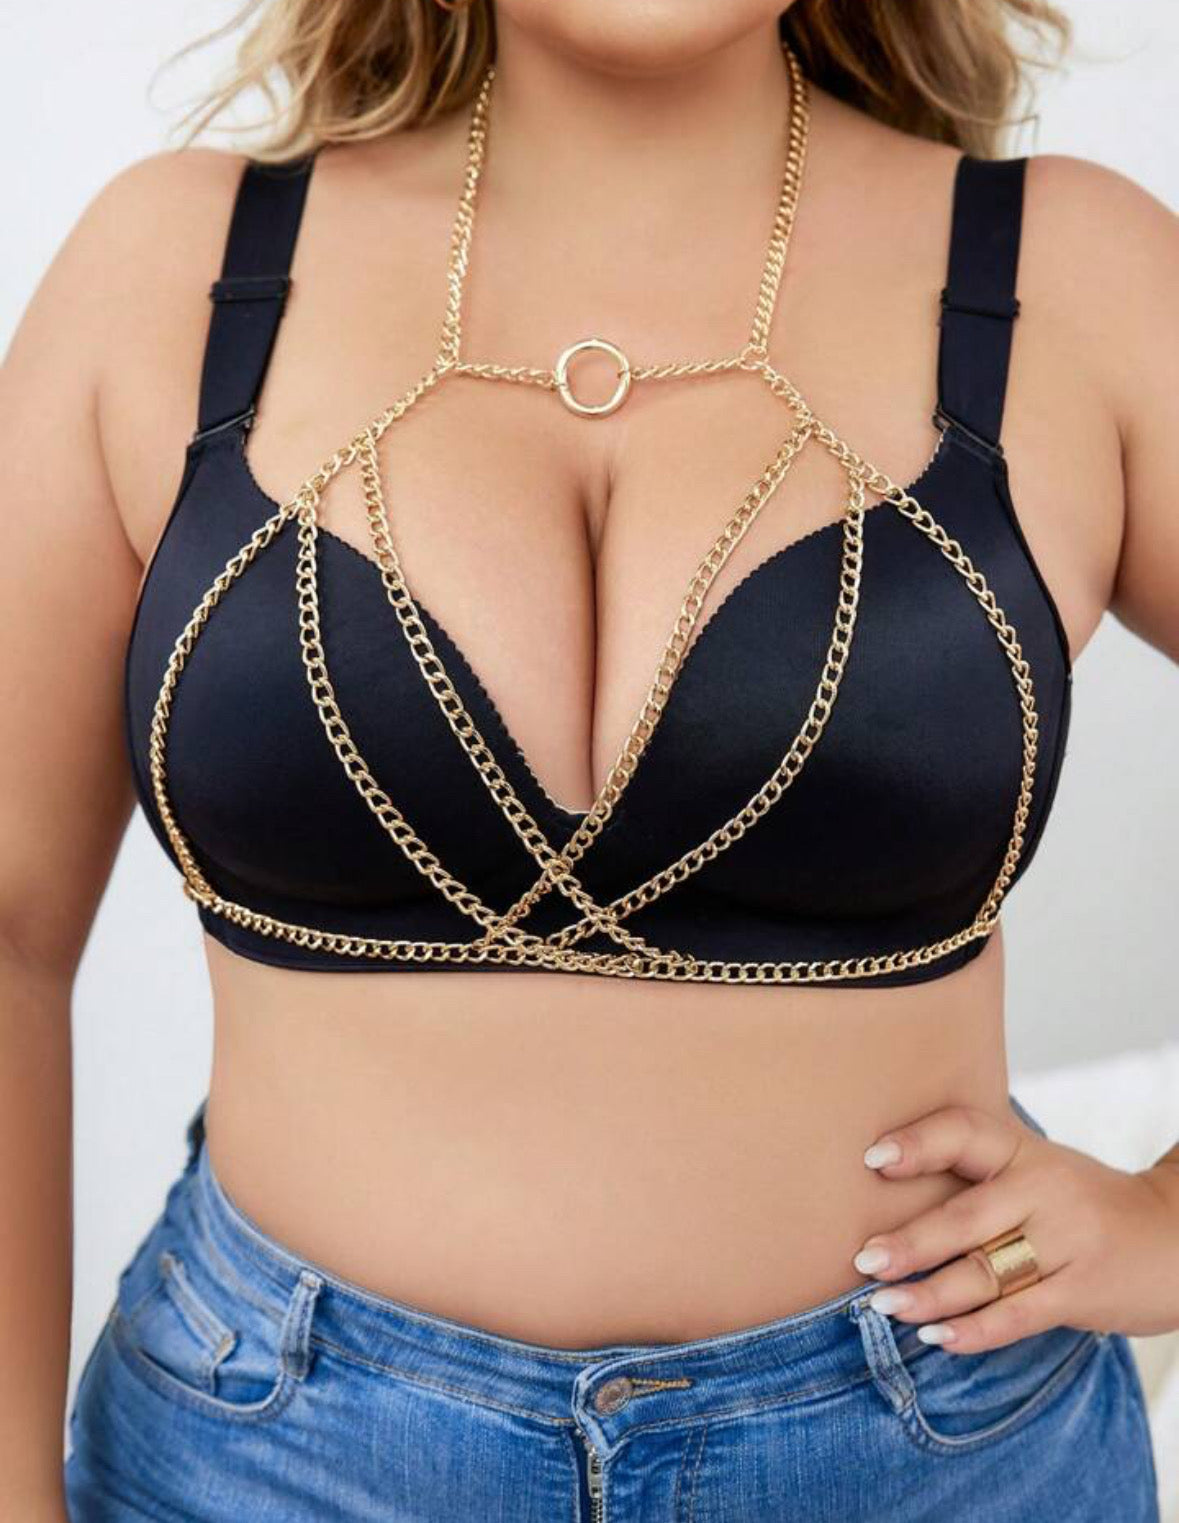 Gold colored ring linked chain harness bra